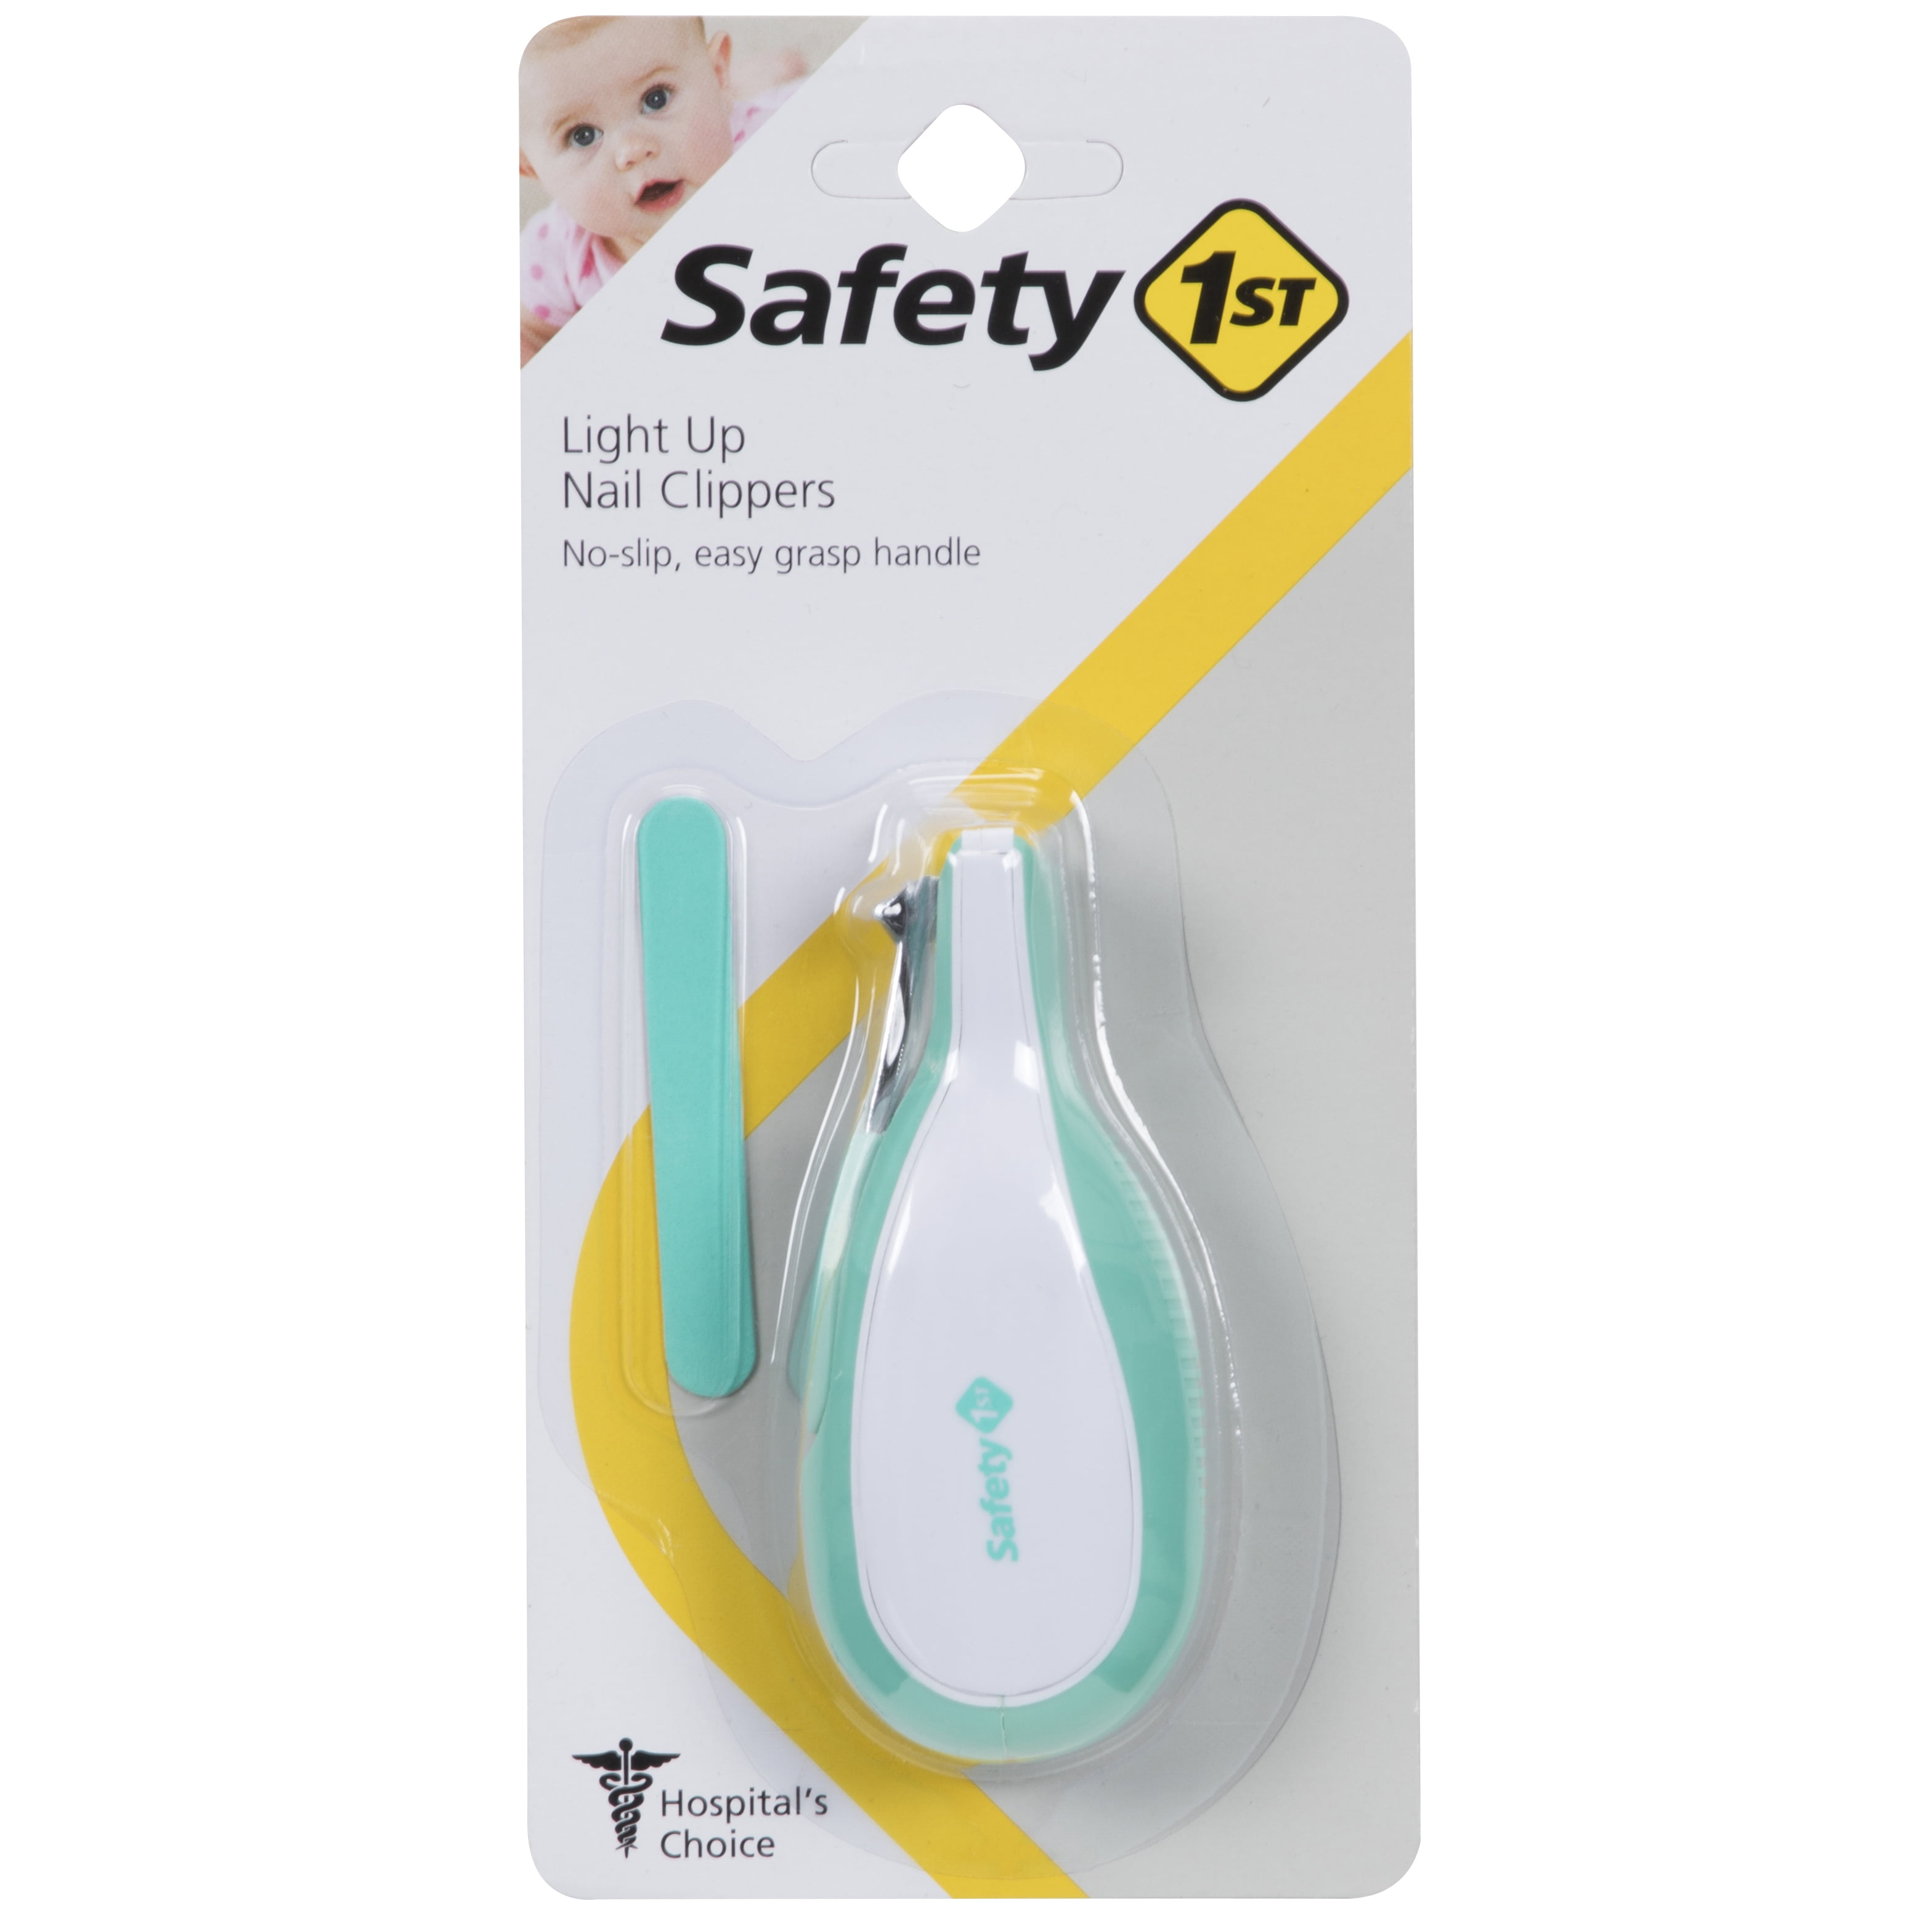 Safety 1st Light Up Nail Clippers With 